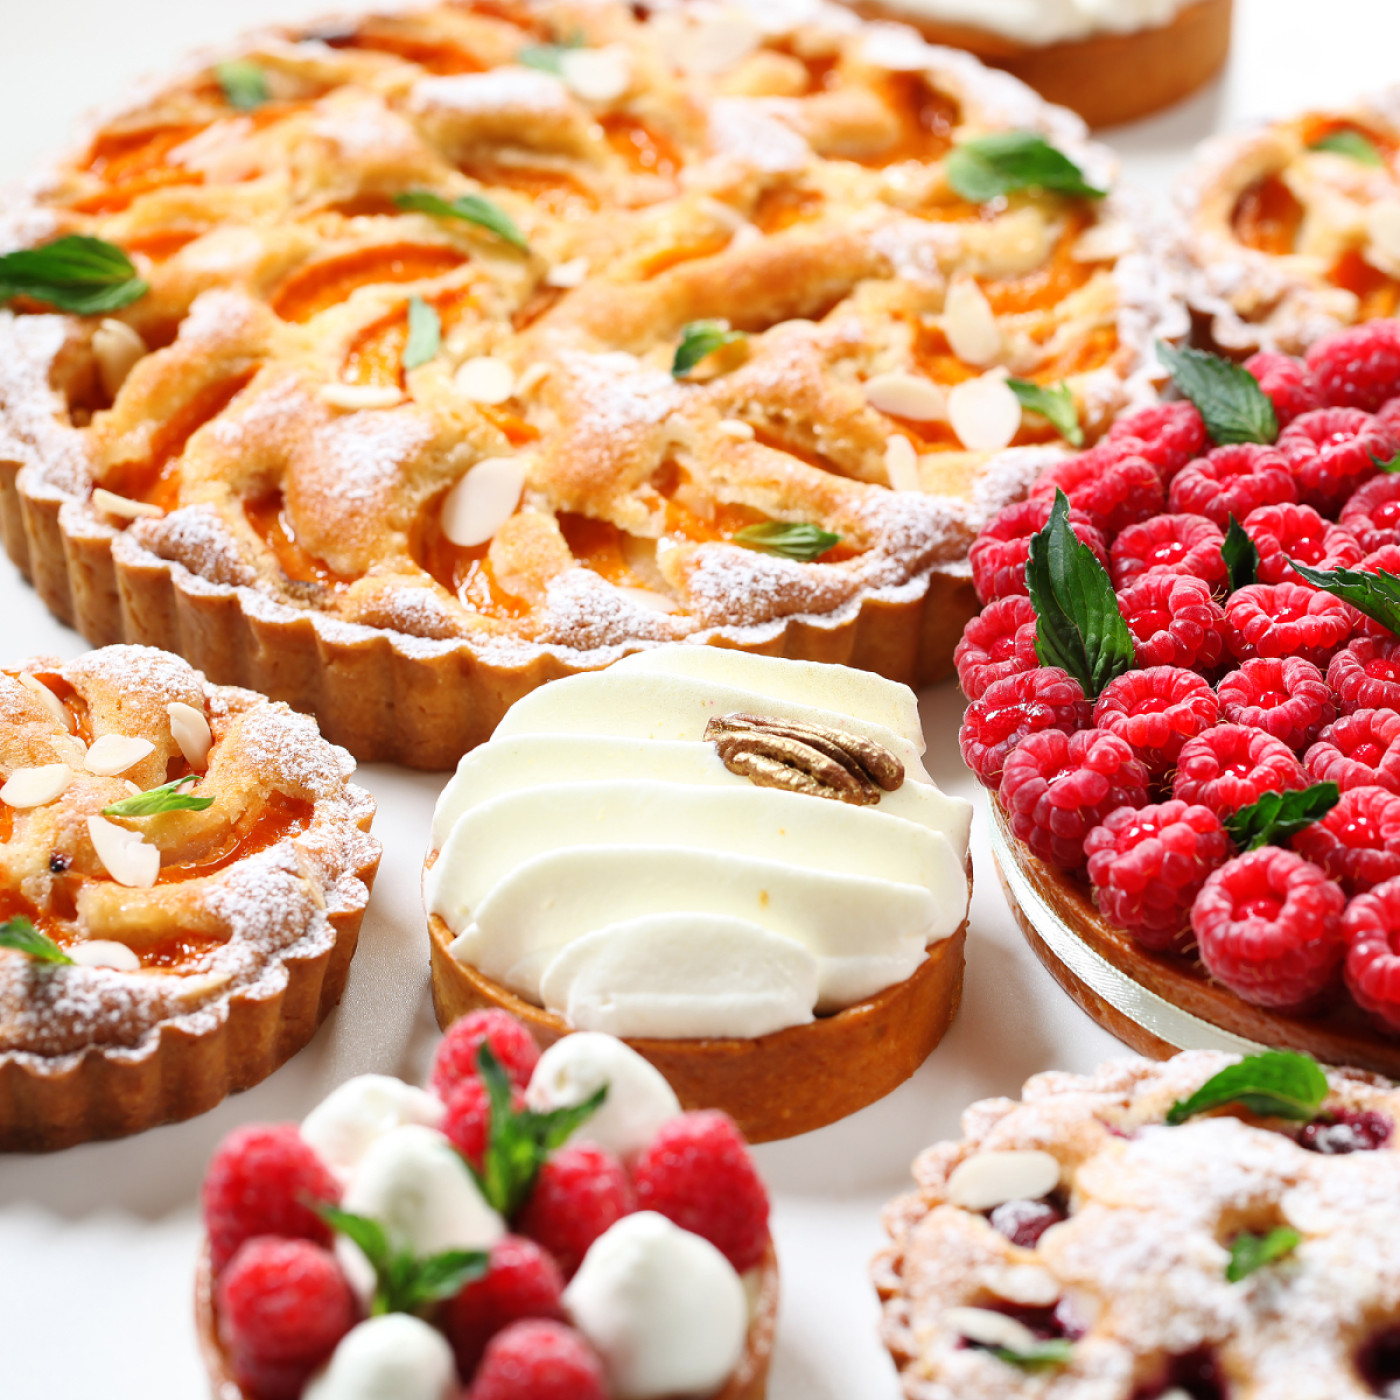 Tarts with berries